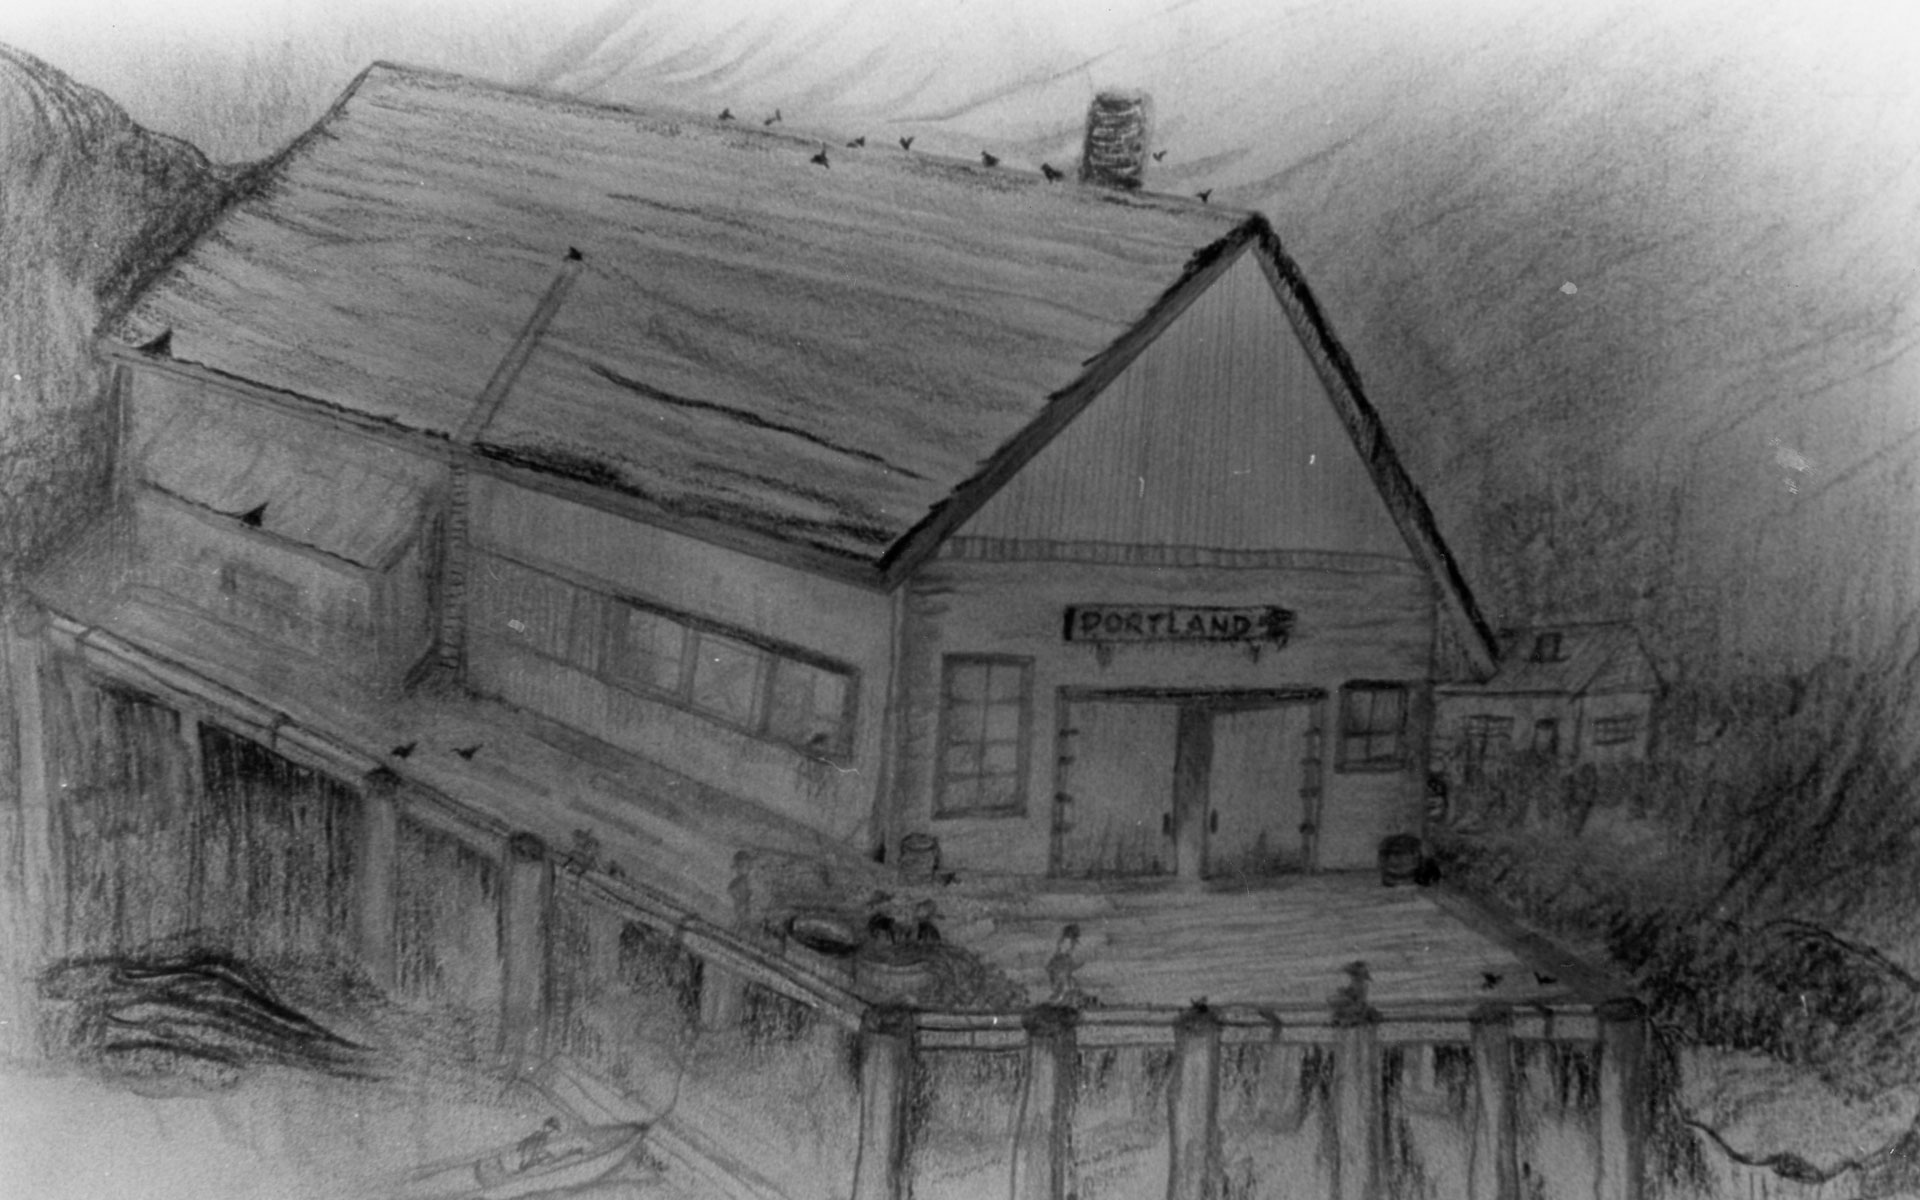 Black and white drawing of the main cannery building and dock.